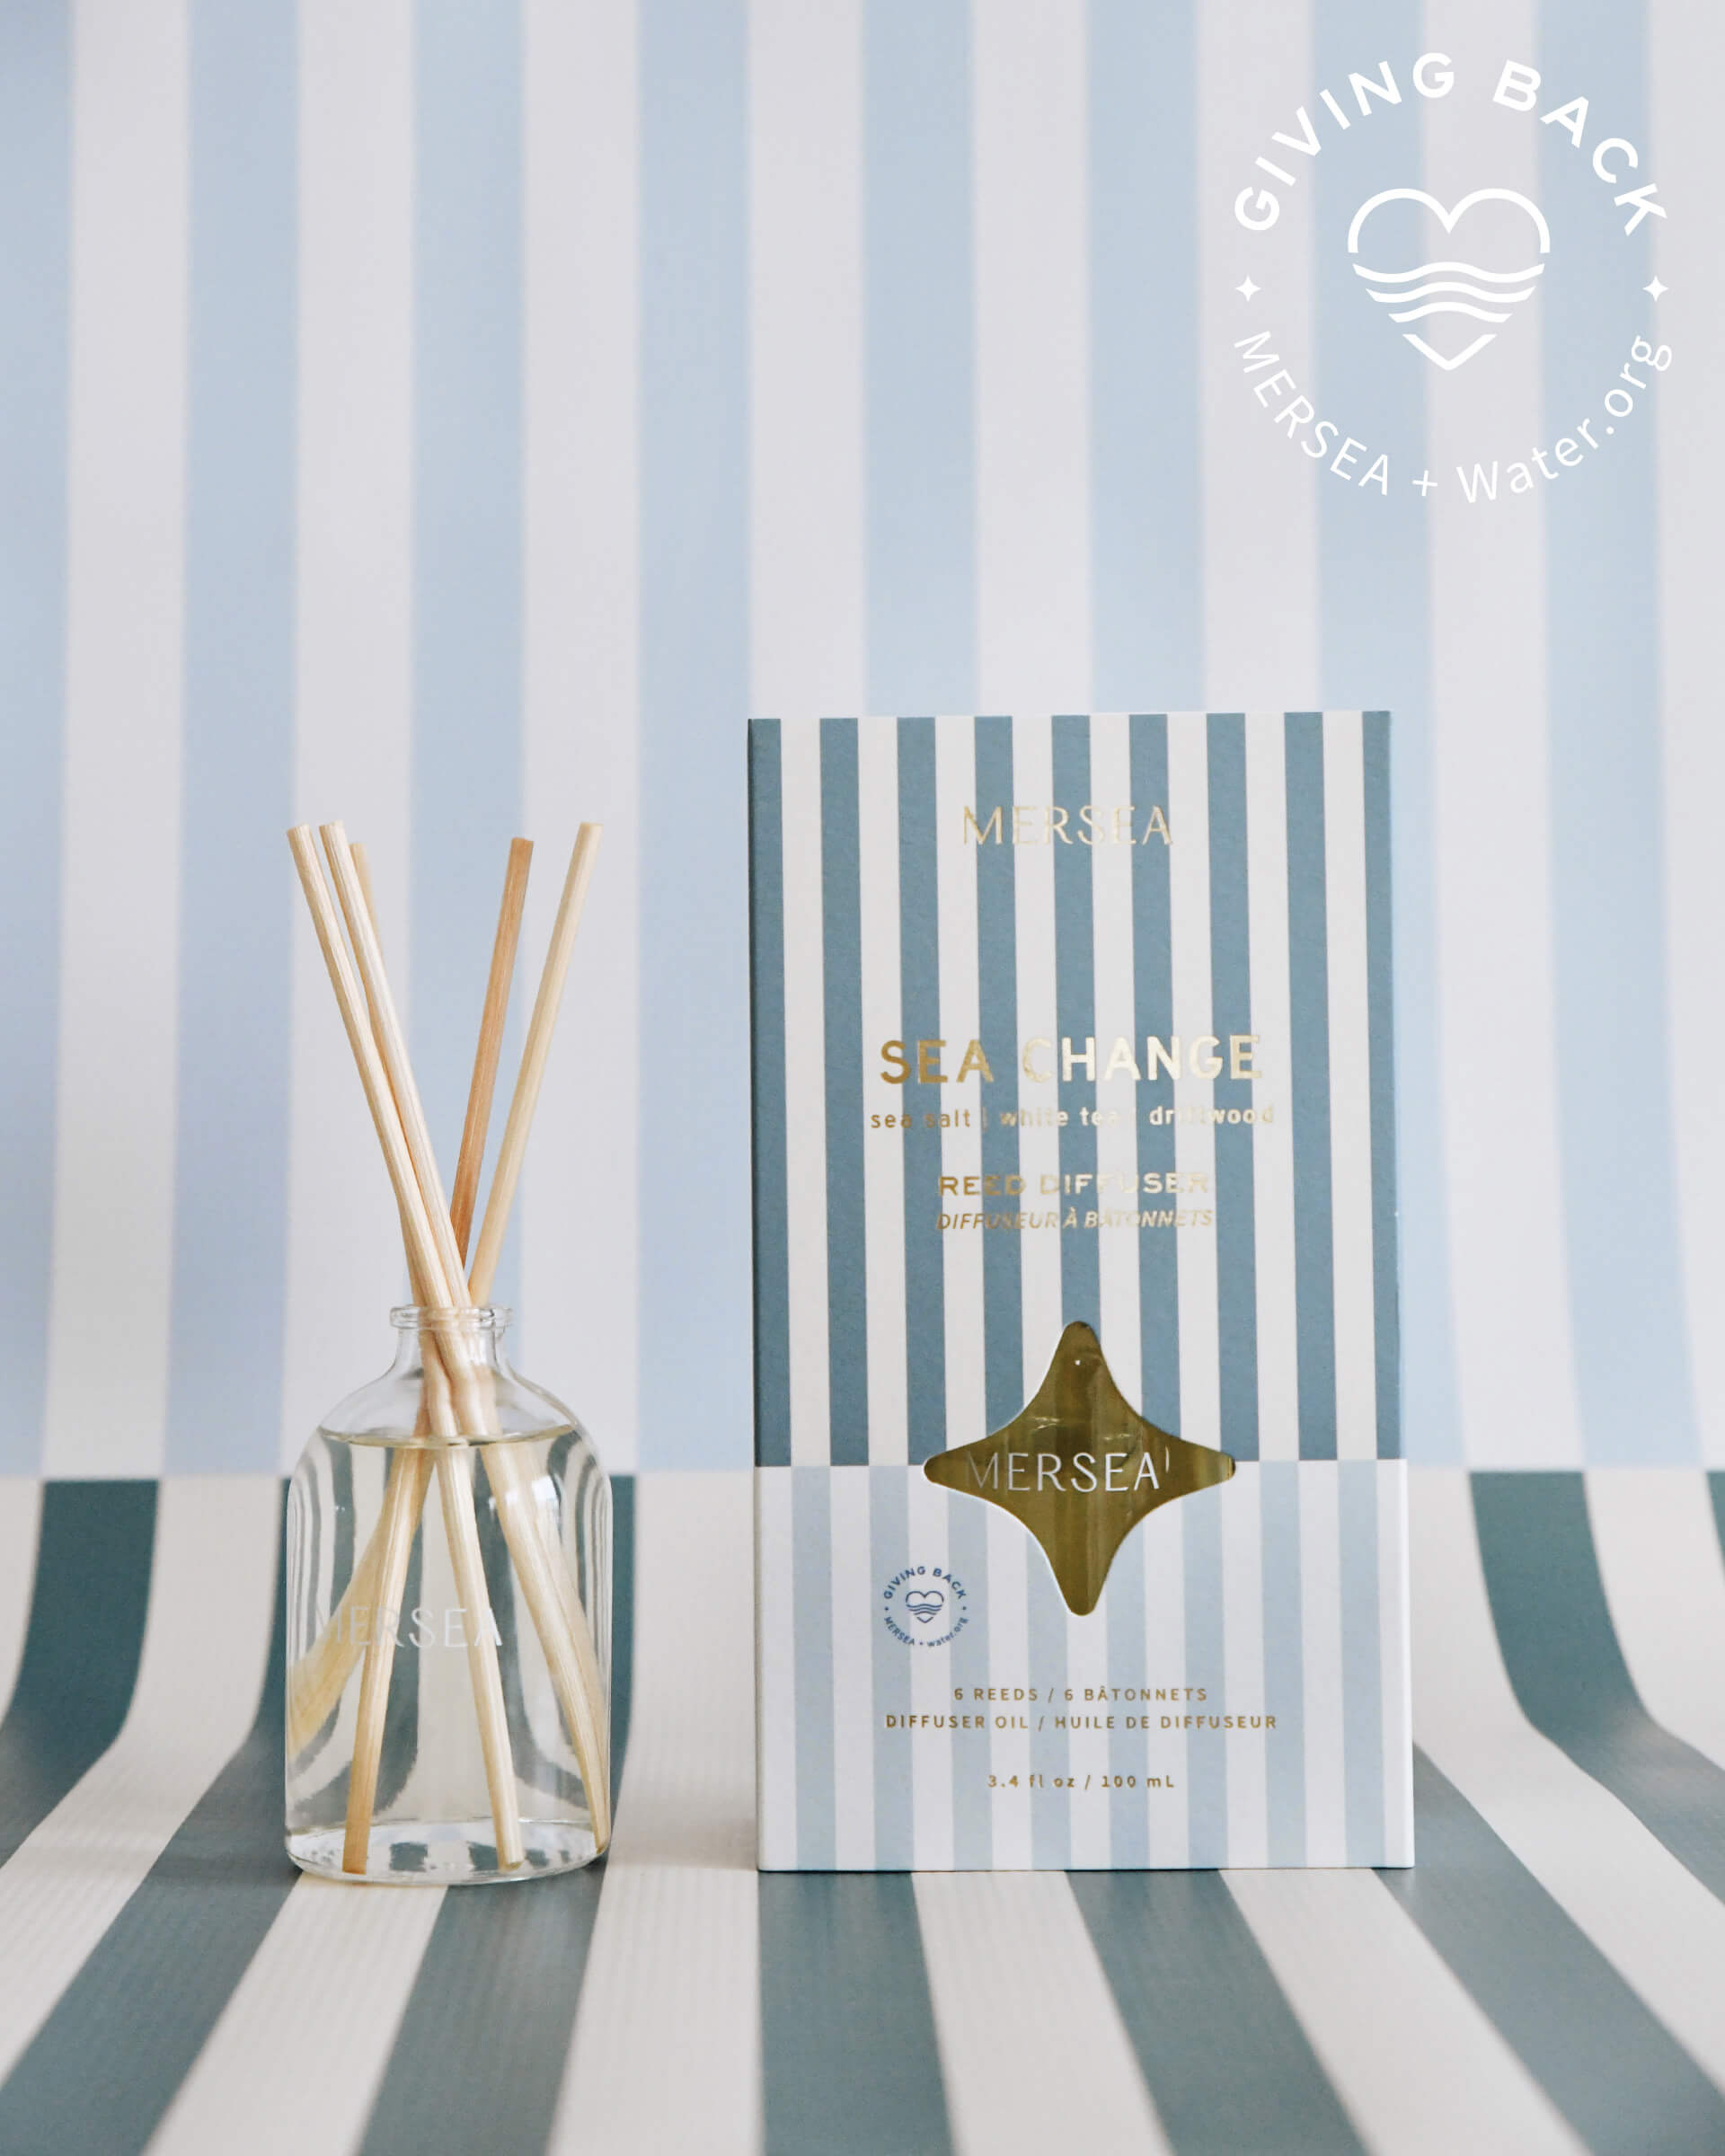 sea change reed diffuser boxed in light and dark blue stripes on light and blue striped background 